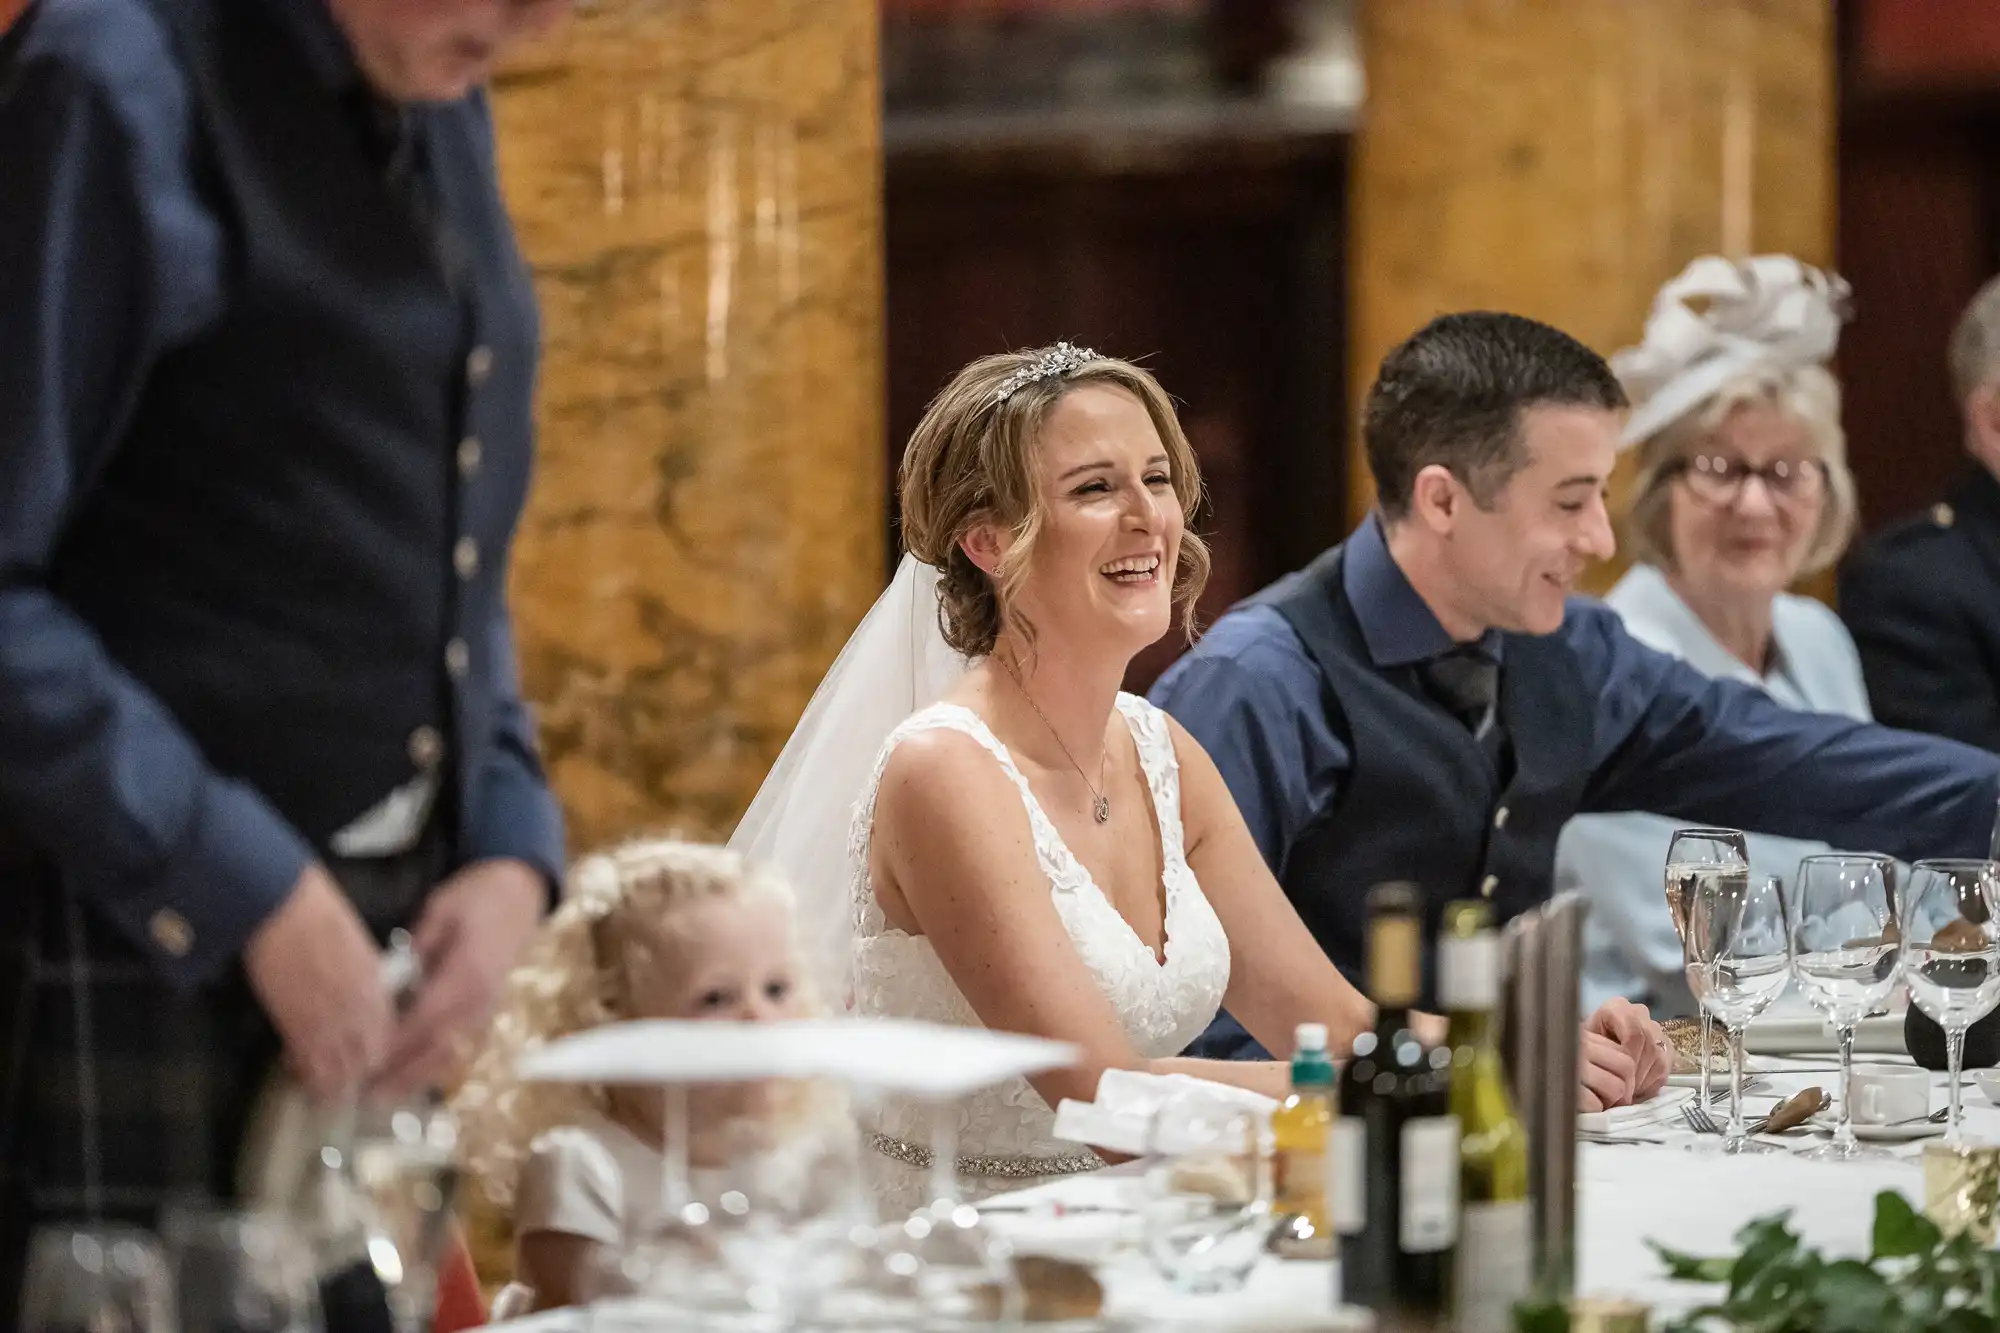 Bride in white dress smiles while seated at a dinner table with family and friends, including a child in the foreground and guests wearing formal attire.